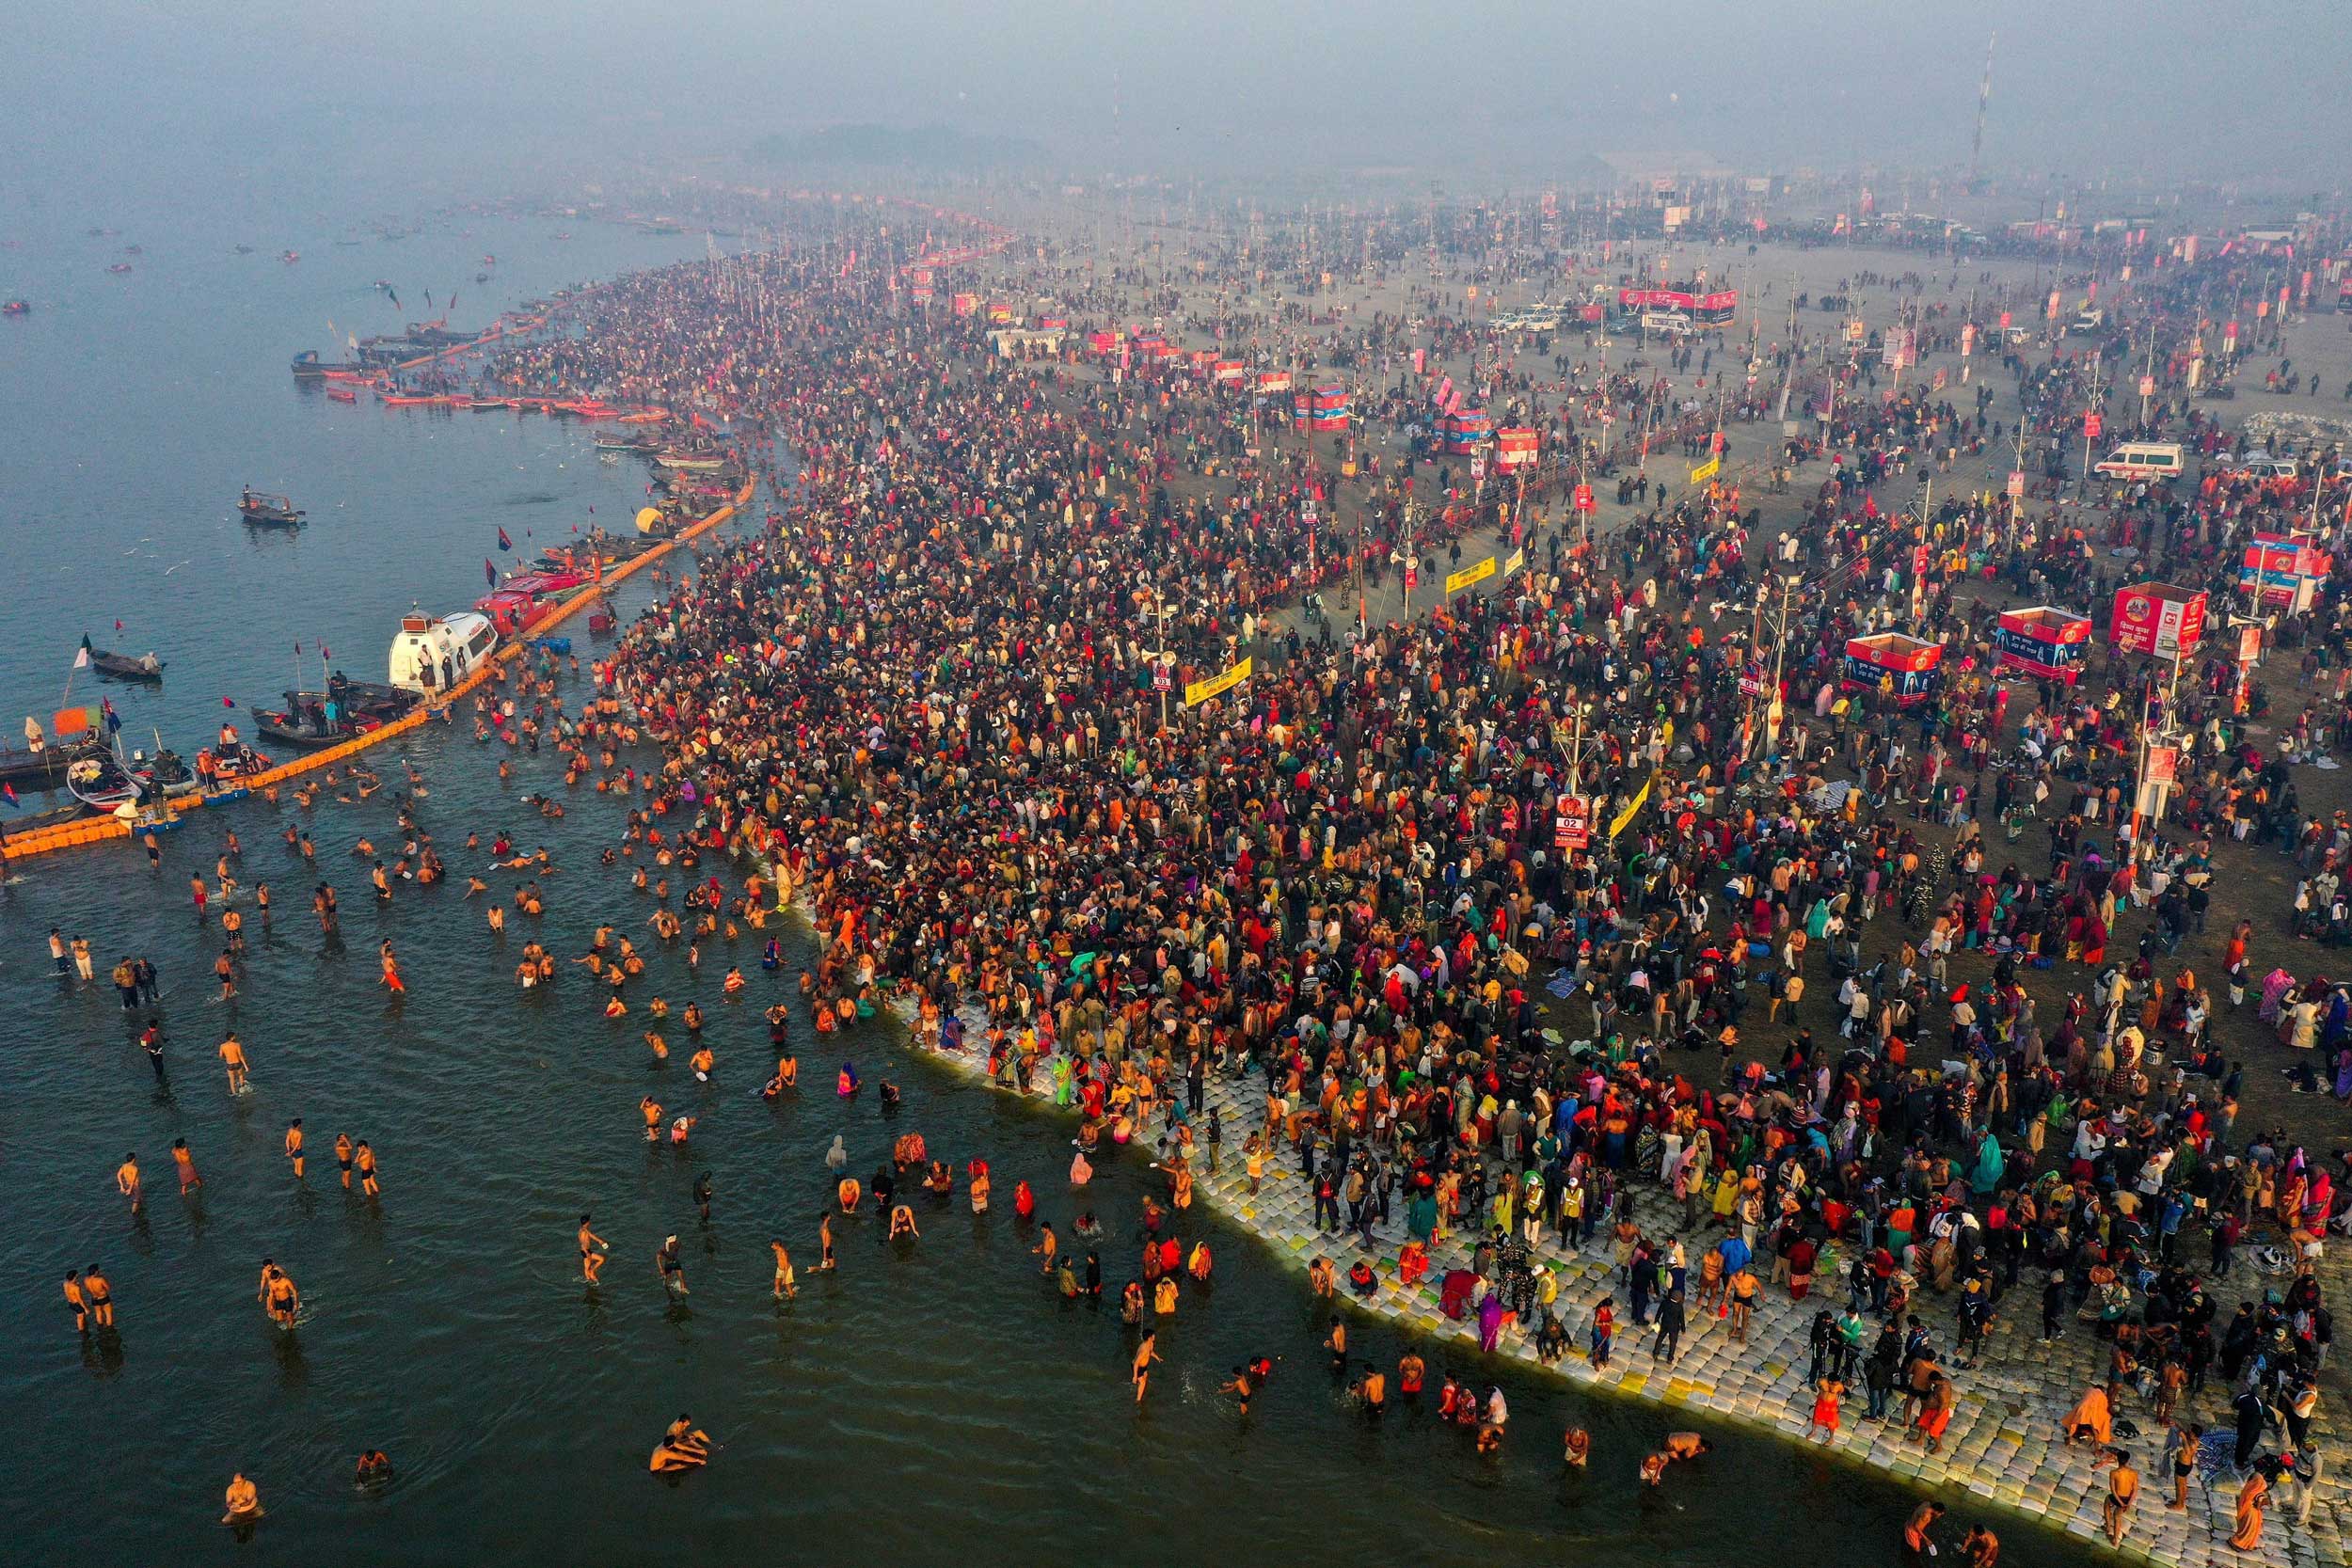 Devotees gathered at Sangam to take a holy dip on the occasion of 'Paush Purnima' during the Kumbh Mela on Monday